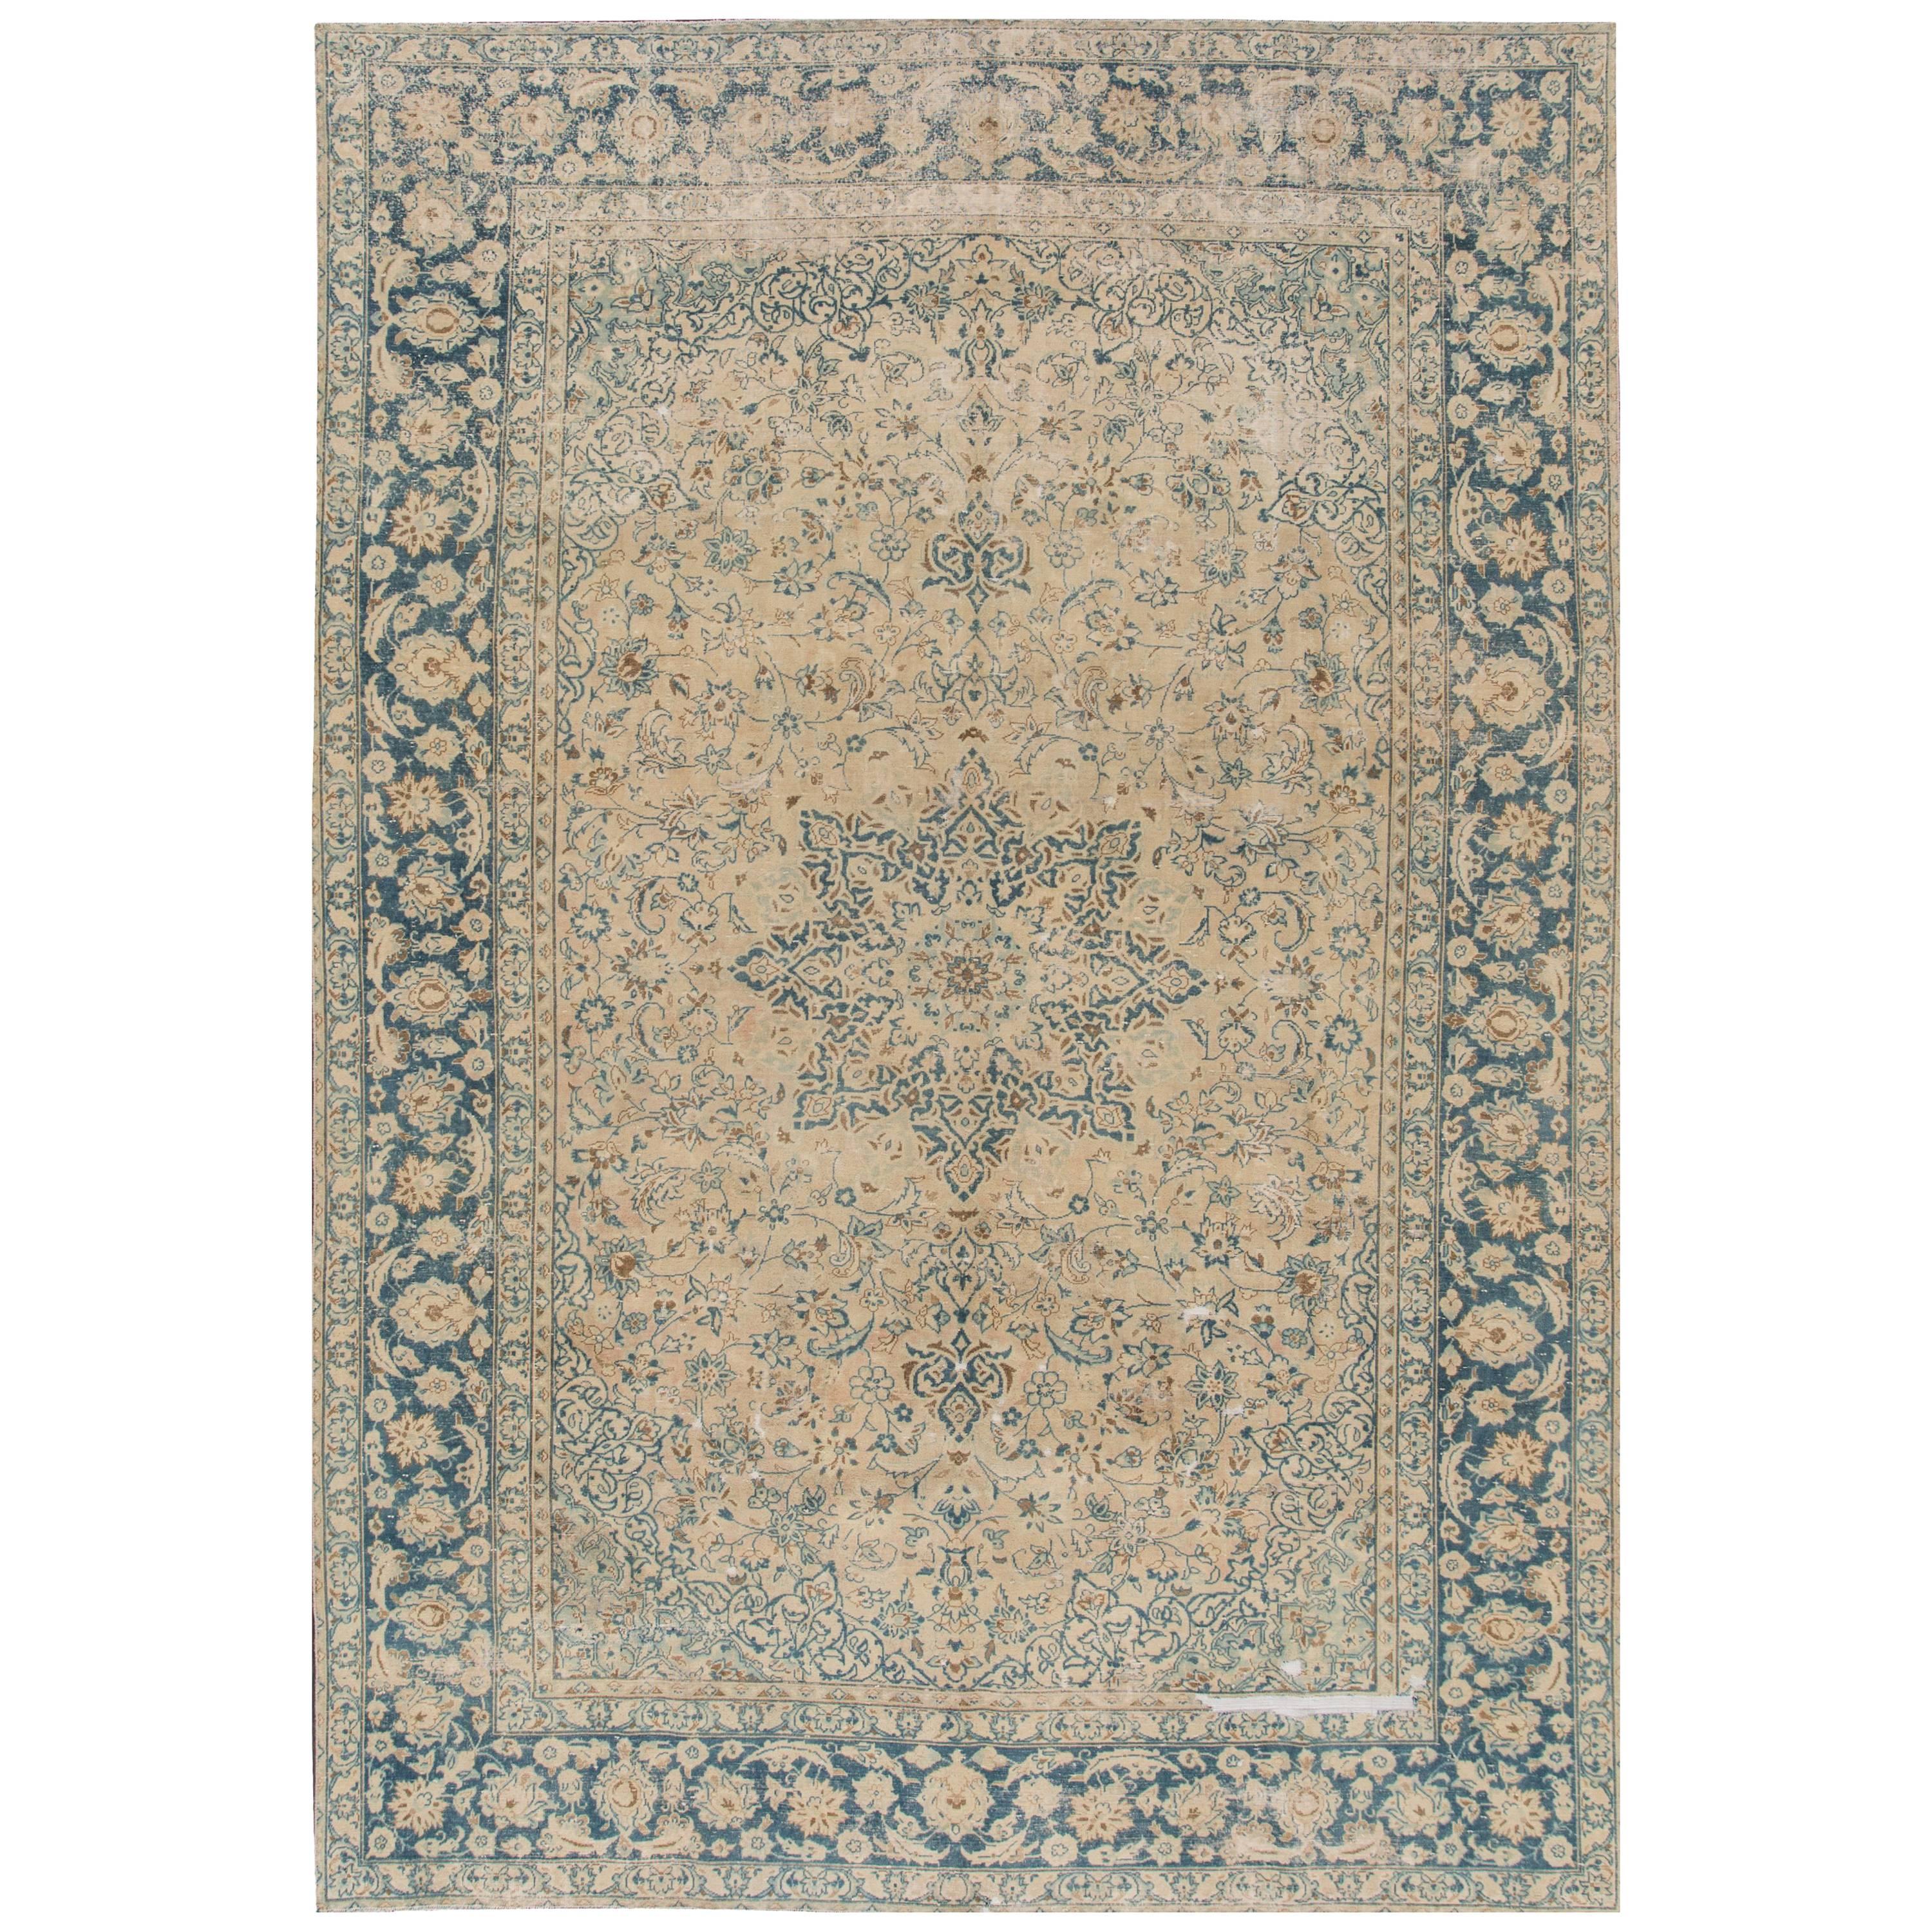 Simply Beautiful Distressed Tabriz Rug For Sale